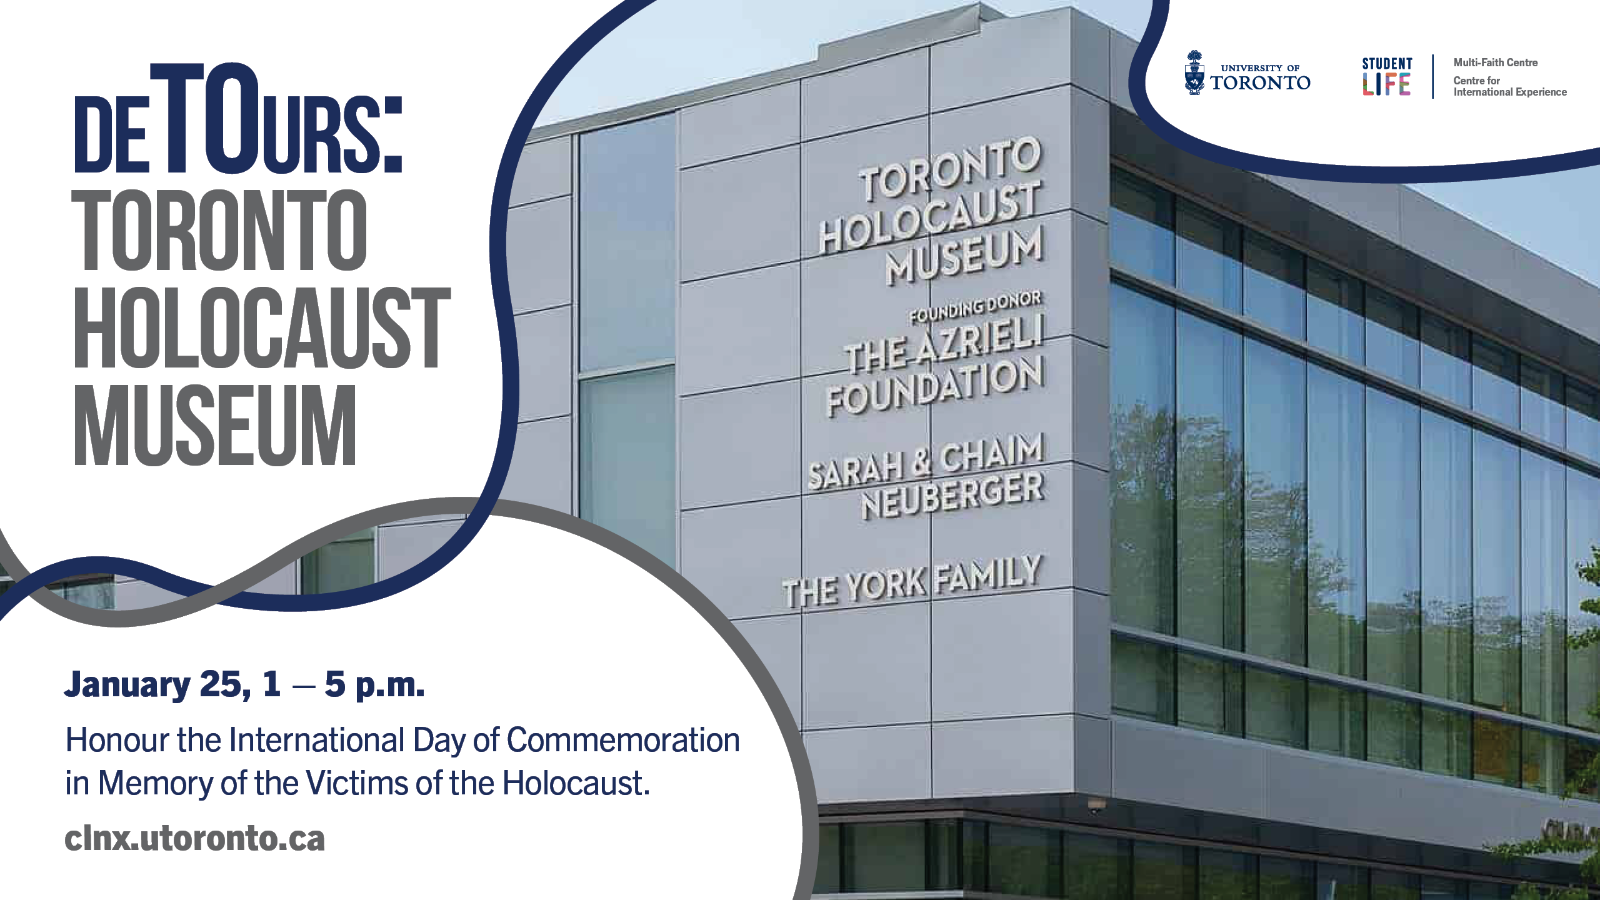 A photo of the Toronto Holo with text, "deTOurs: Toronto Holocaust Musuem; January 25, 1-5PM; Honour the International Day of Commemoration in Memory of the Victims of the Holocaust; clnx.utoronto.ca".